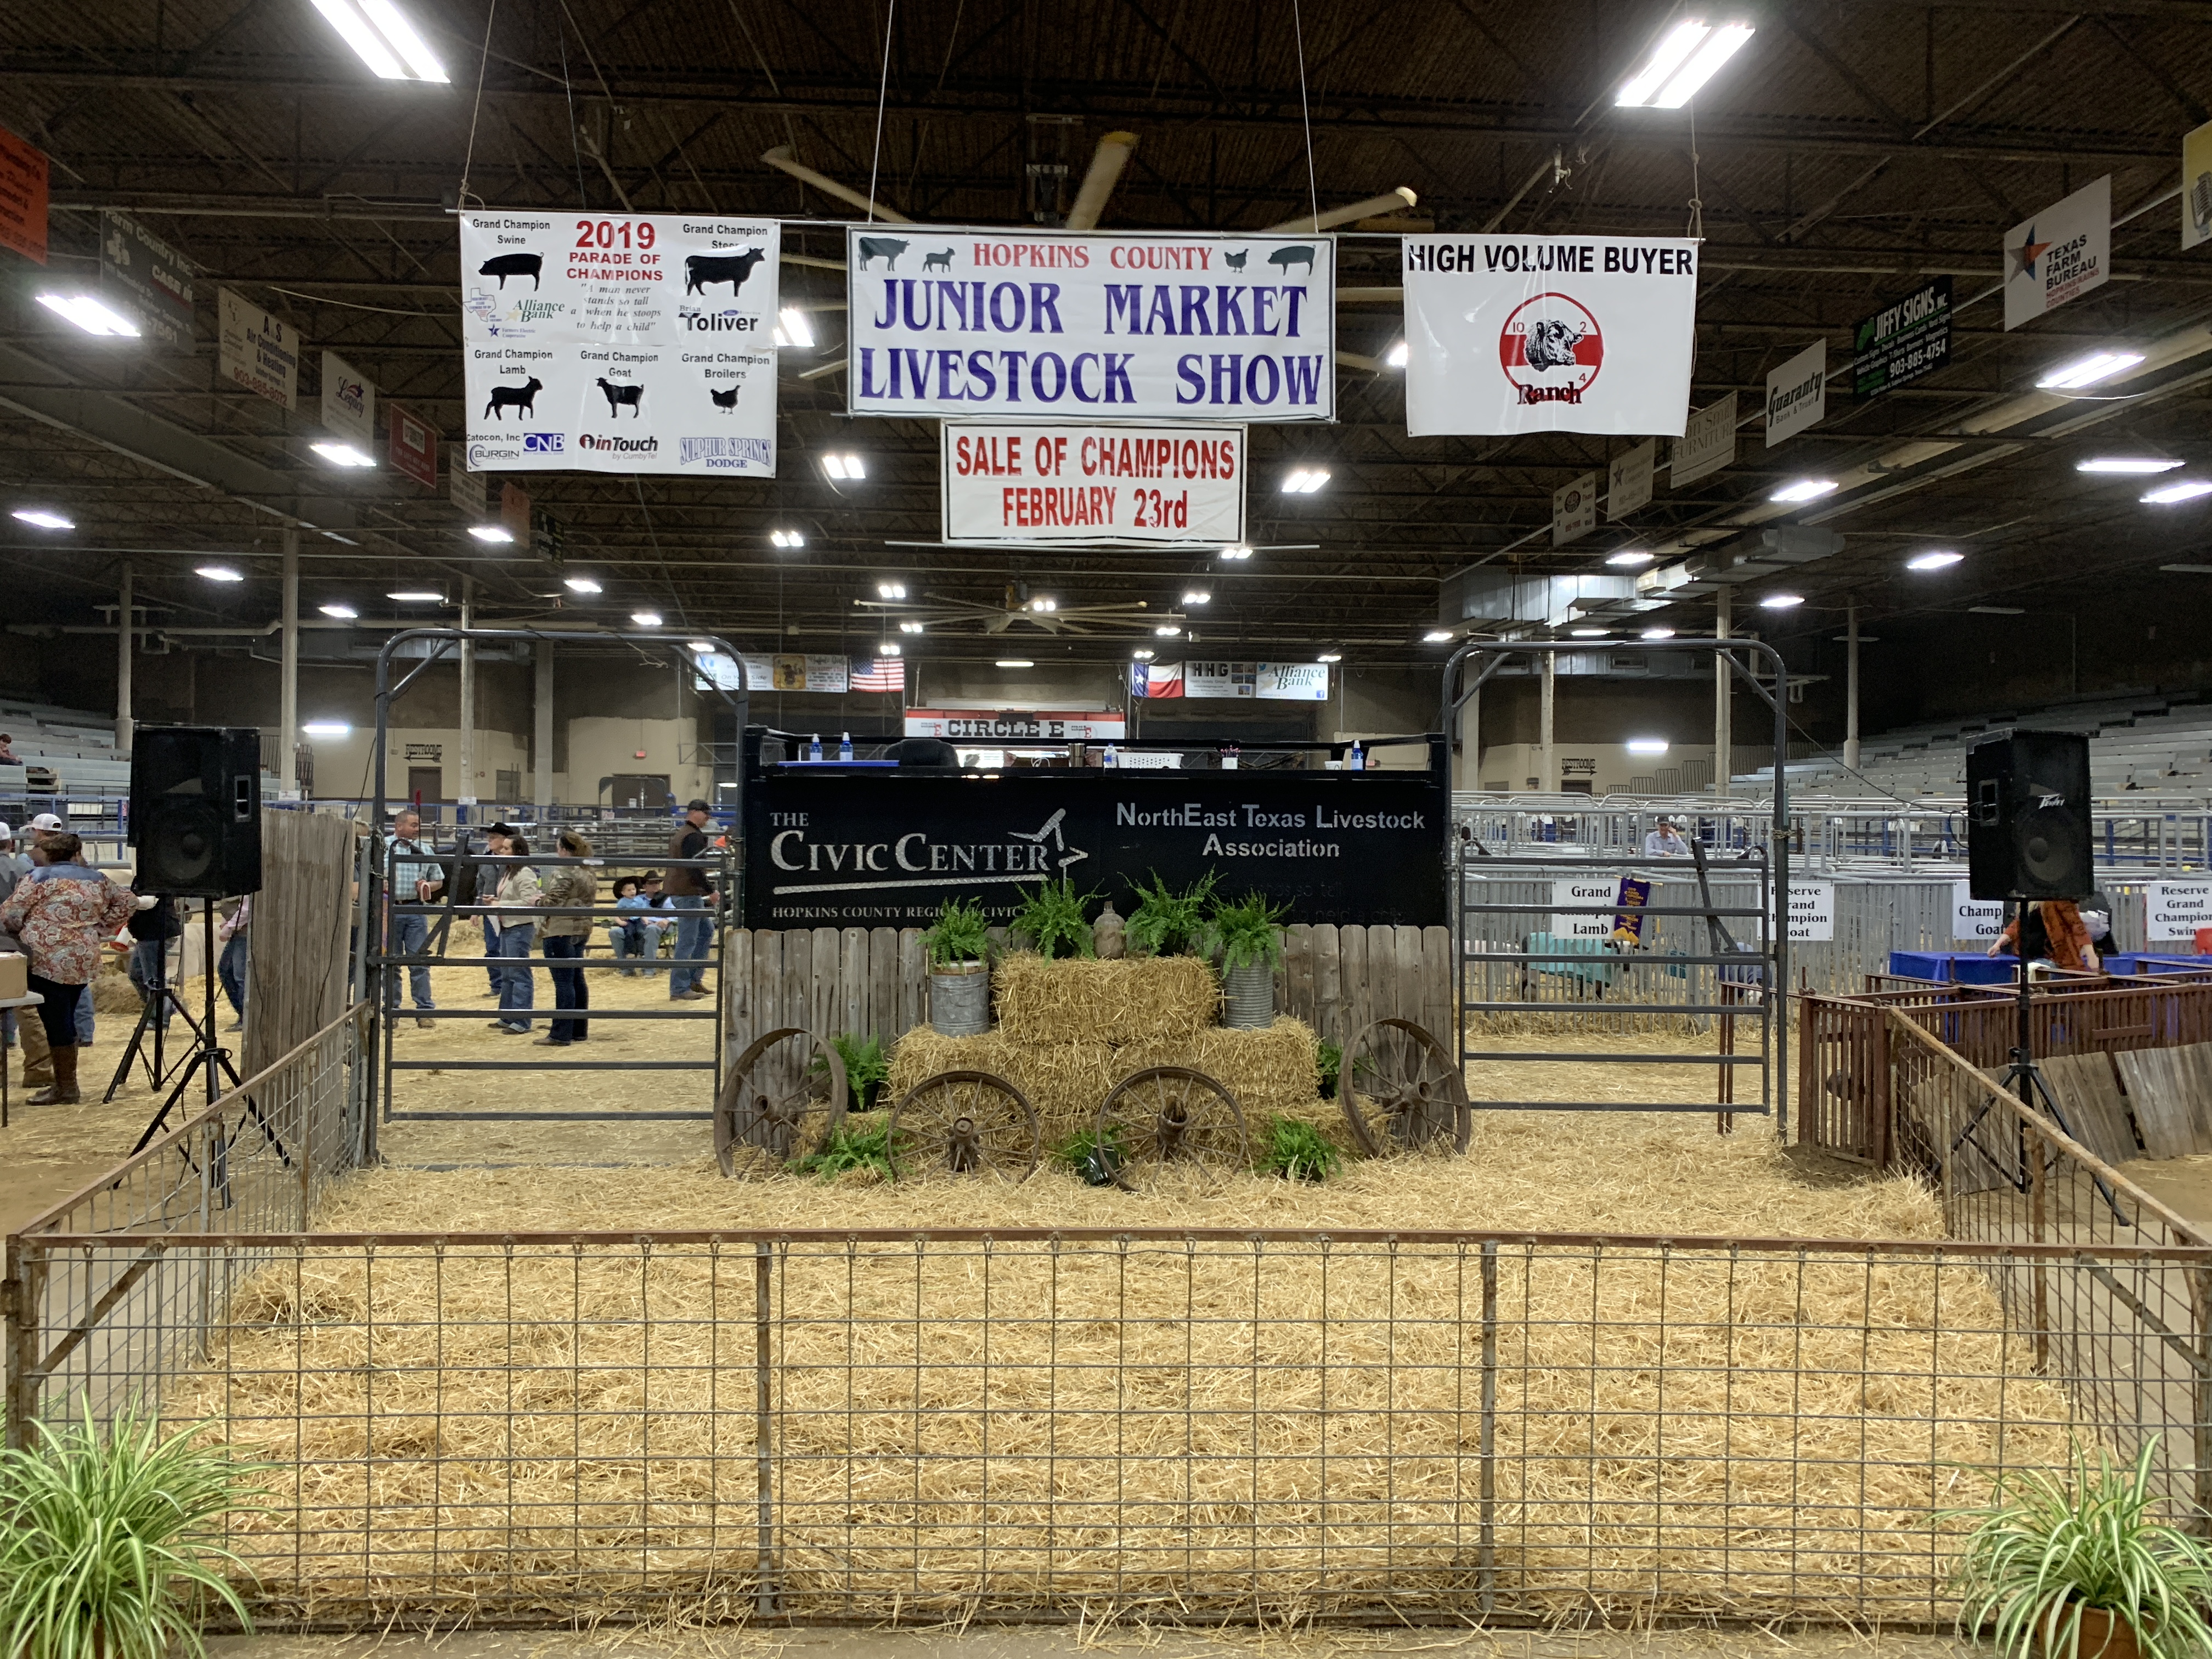 Preliminary Total for 2019 Hopkins County Junior Market Show Sale of Champions is $405,000. Plus List of Grand Champion and Reserve Champion Sales.